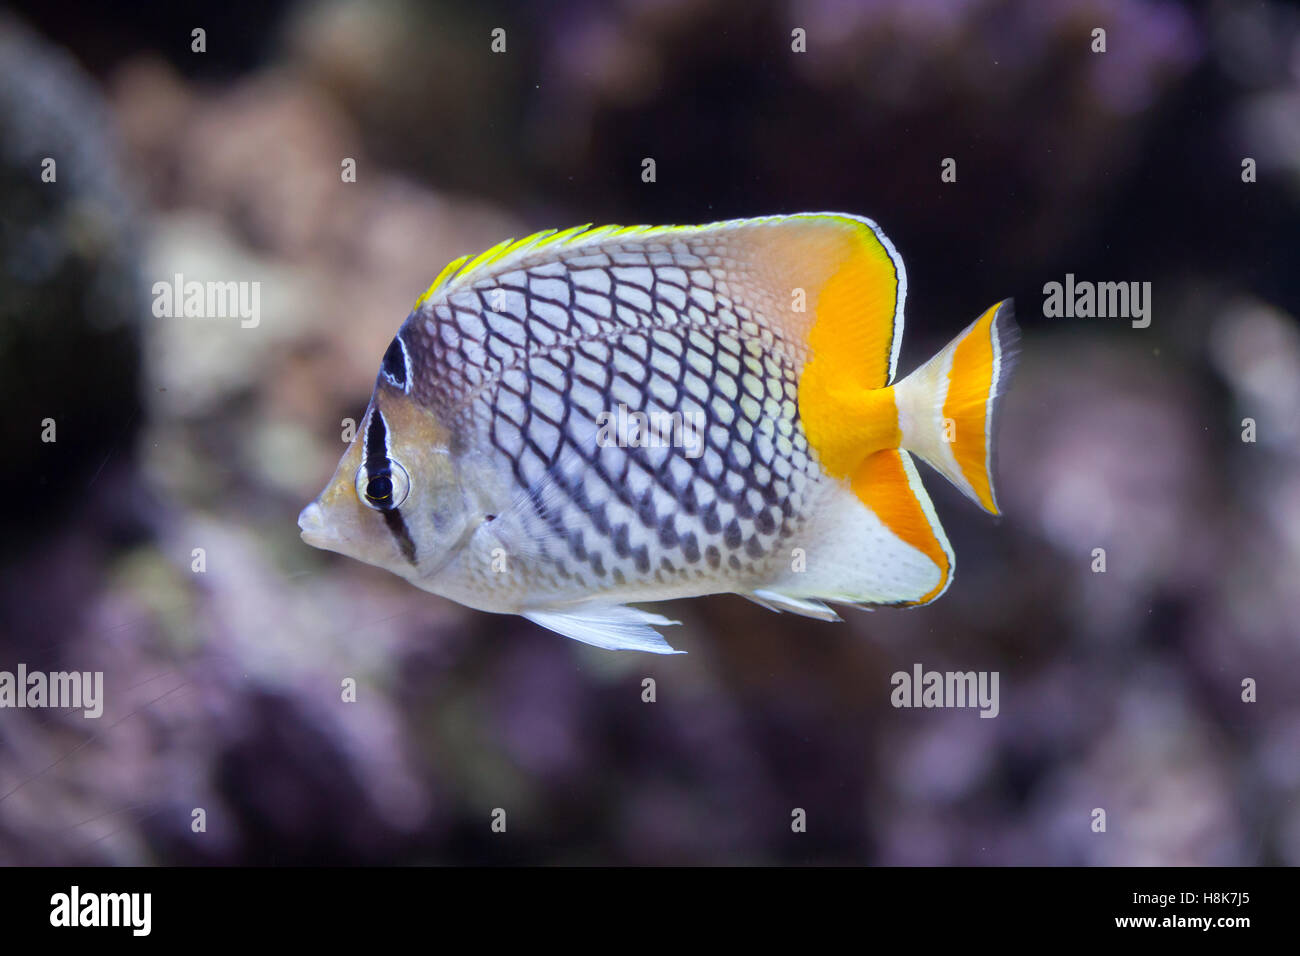 Pearlscale butterflyfish (Chaetodon xanthurus), also known as the Philippines chevron butterflyfish. Stock Photo